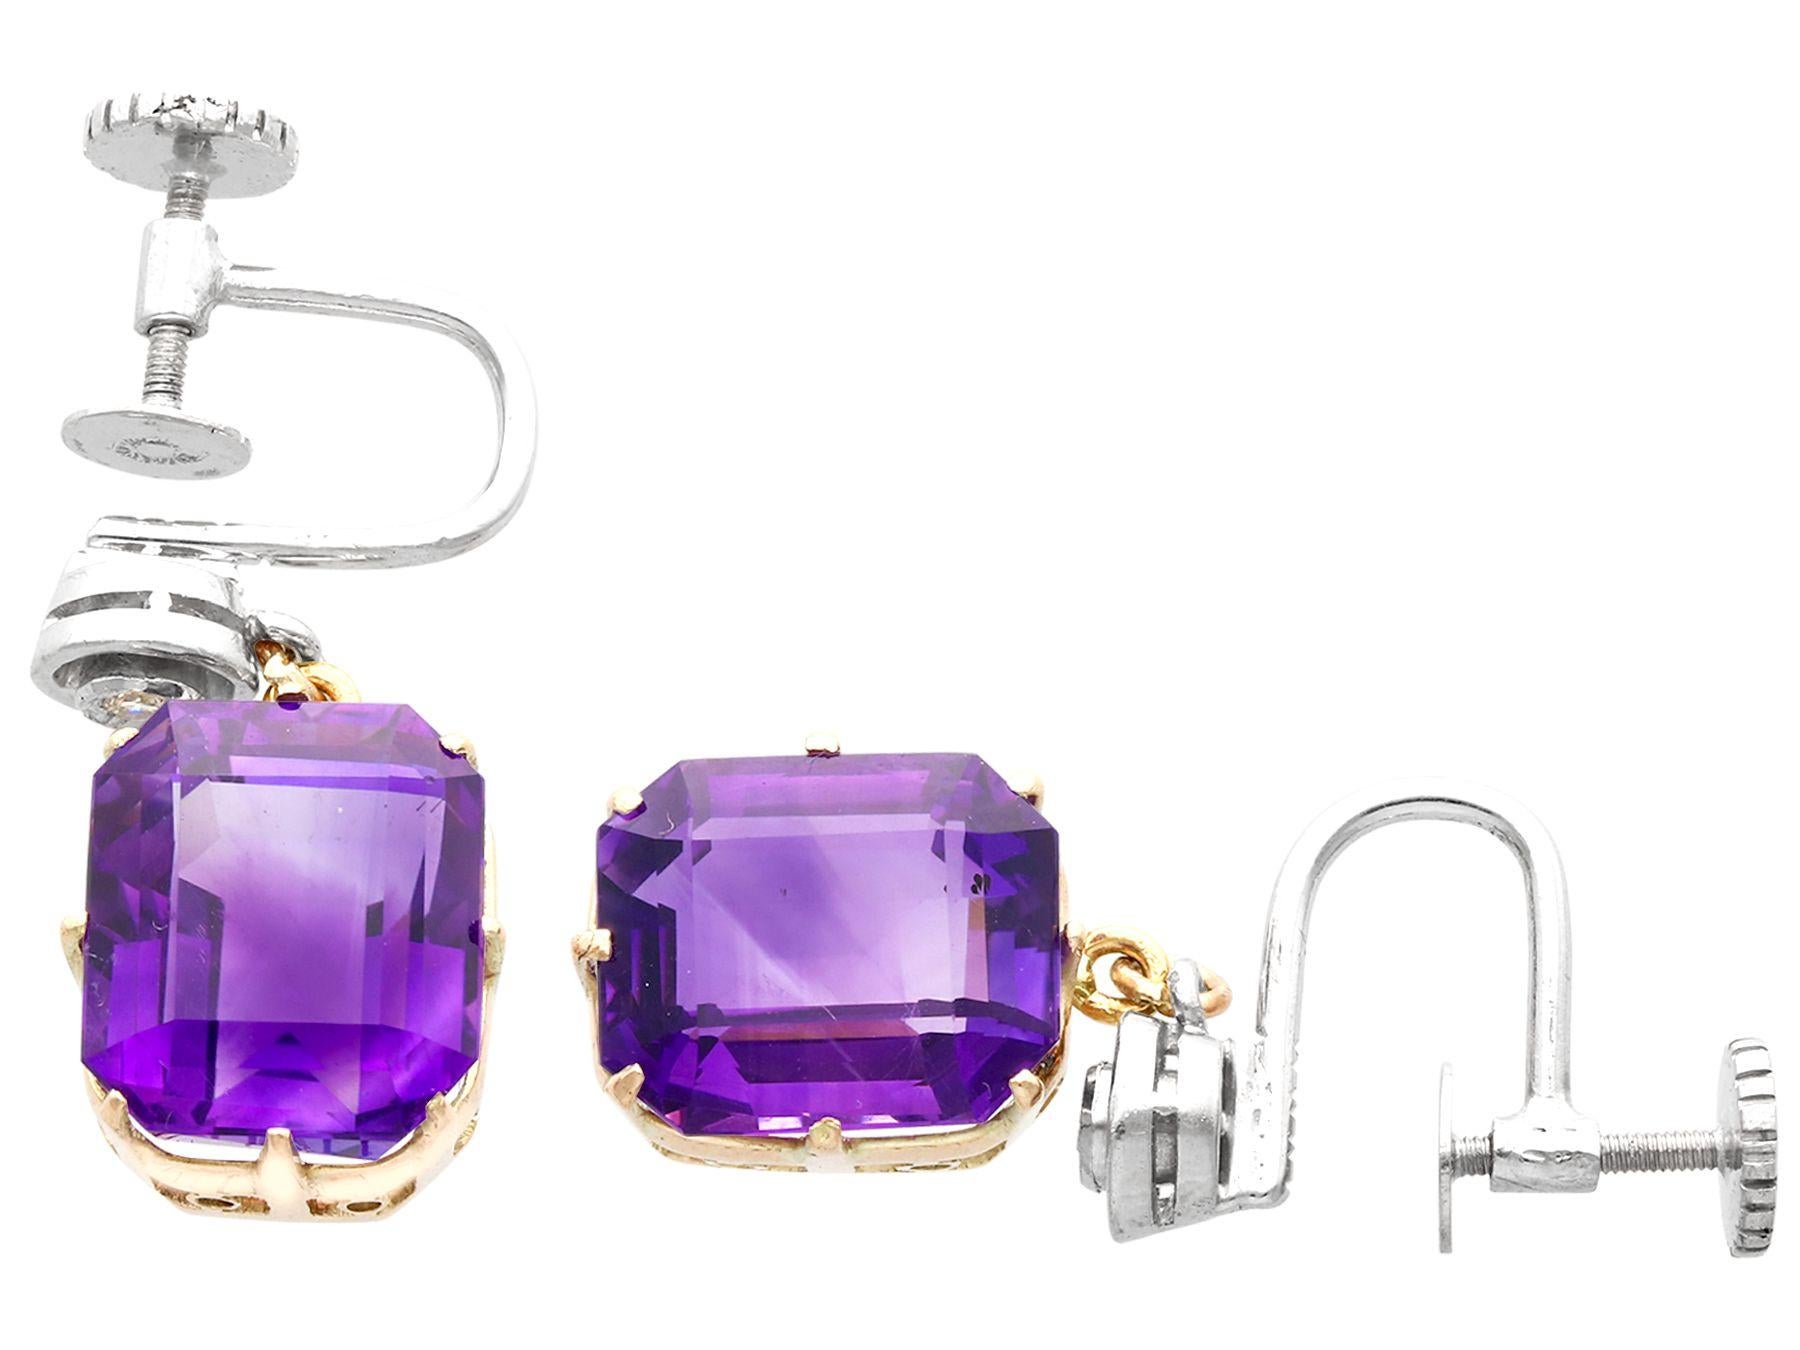 Emerald Cut Vintage 13.68Ct Amethyst Diamond and White Gold Drop Earrings Circa 1940